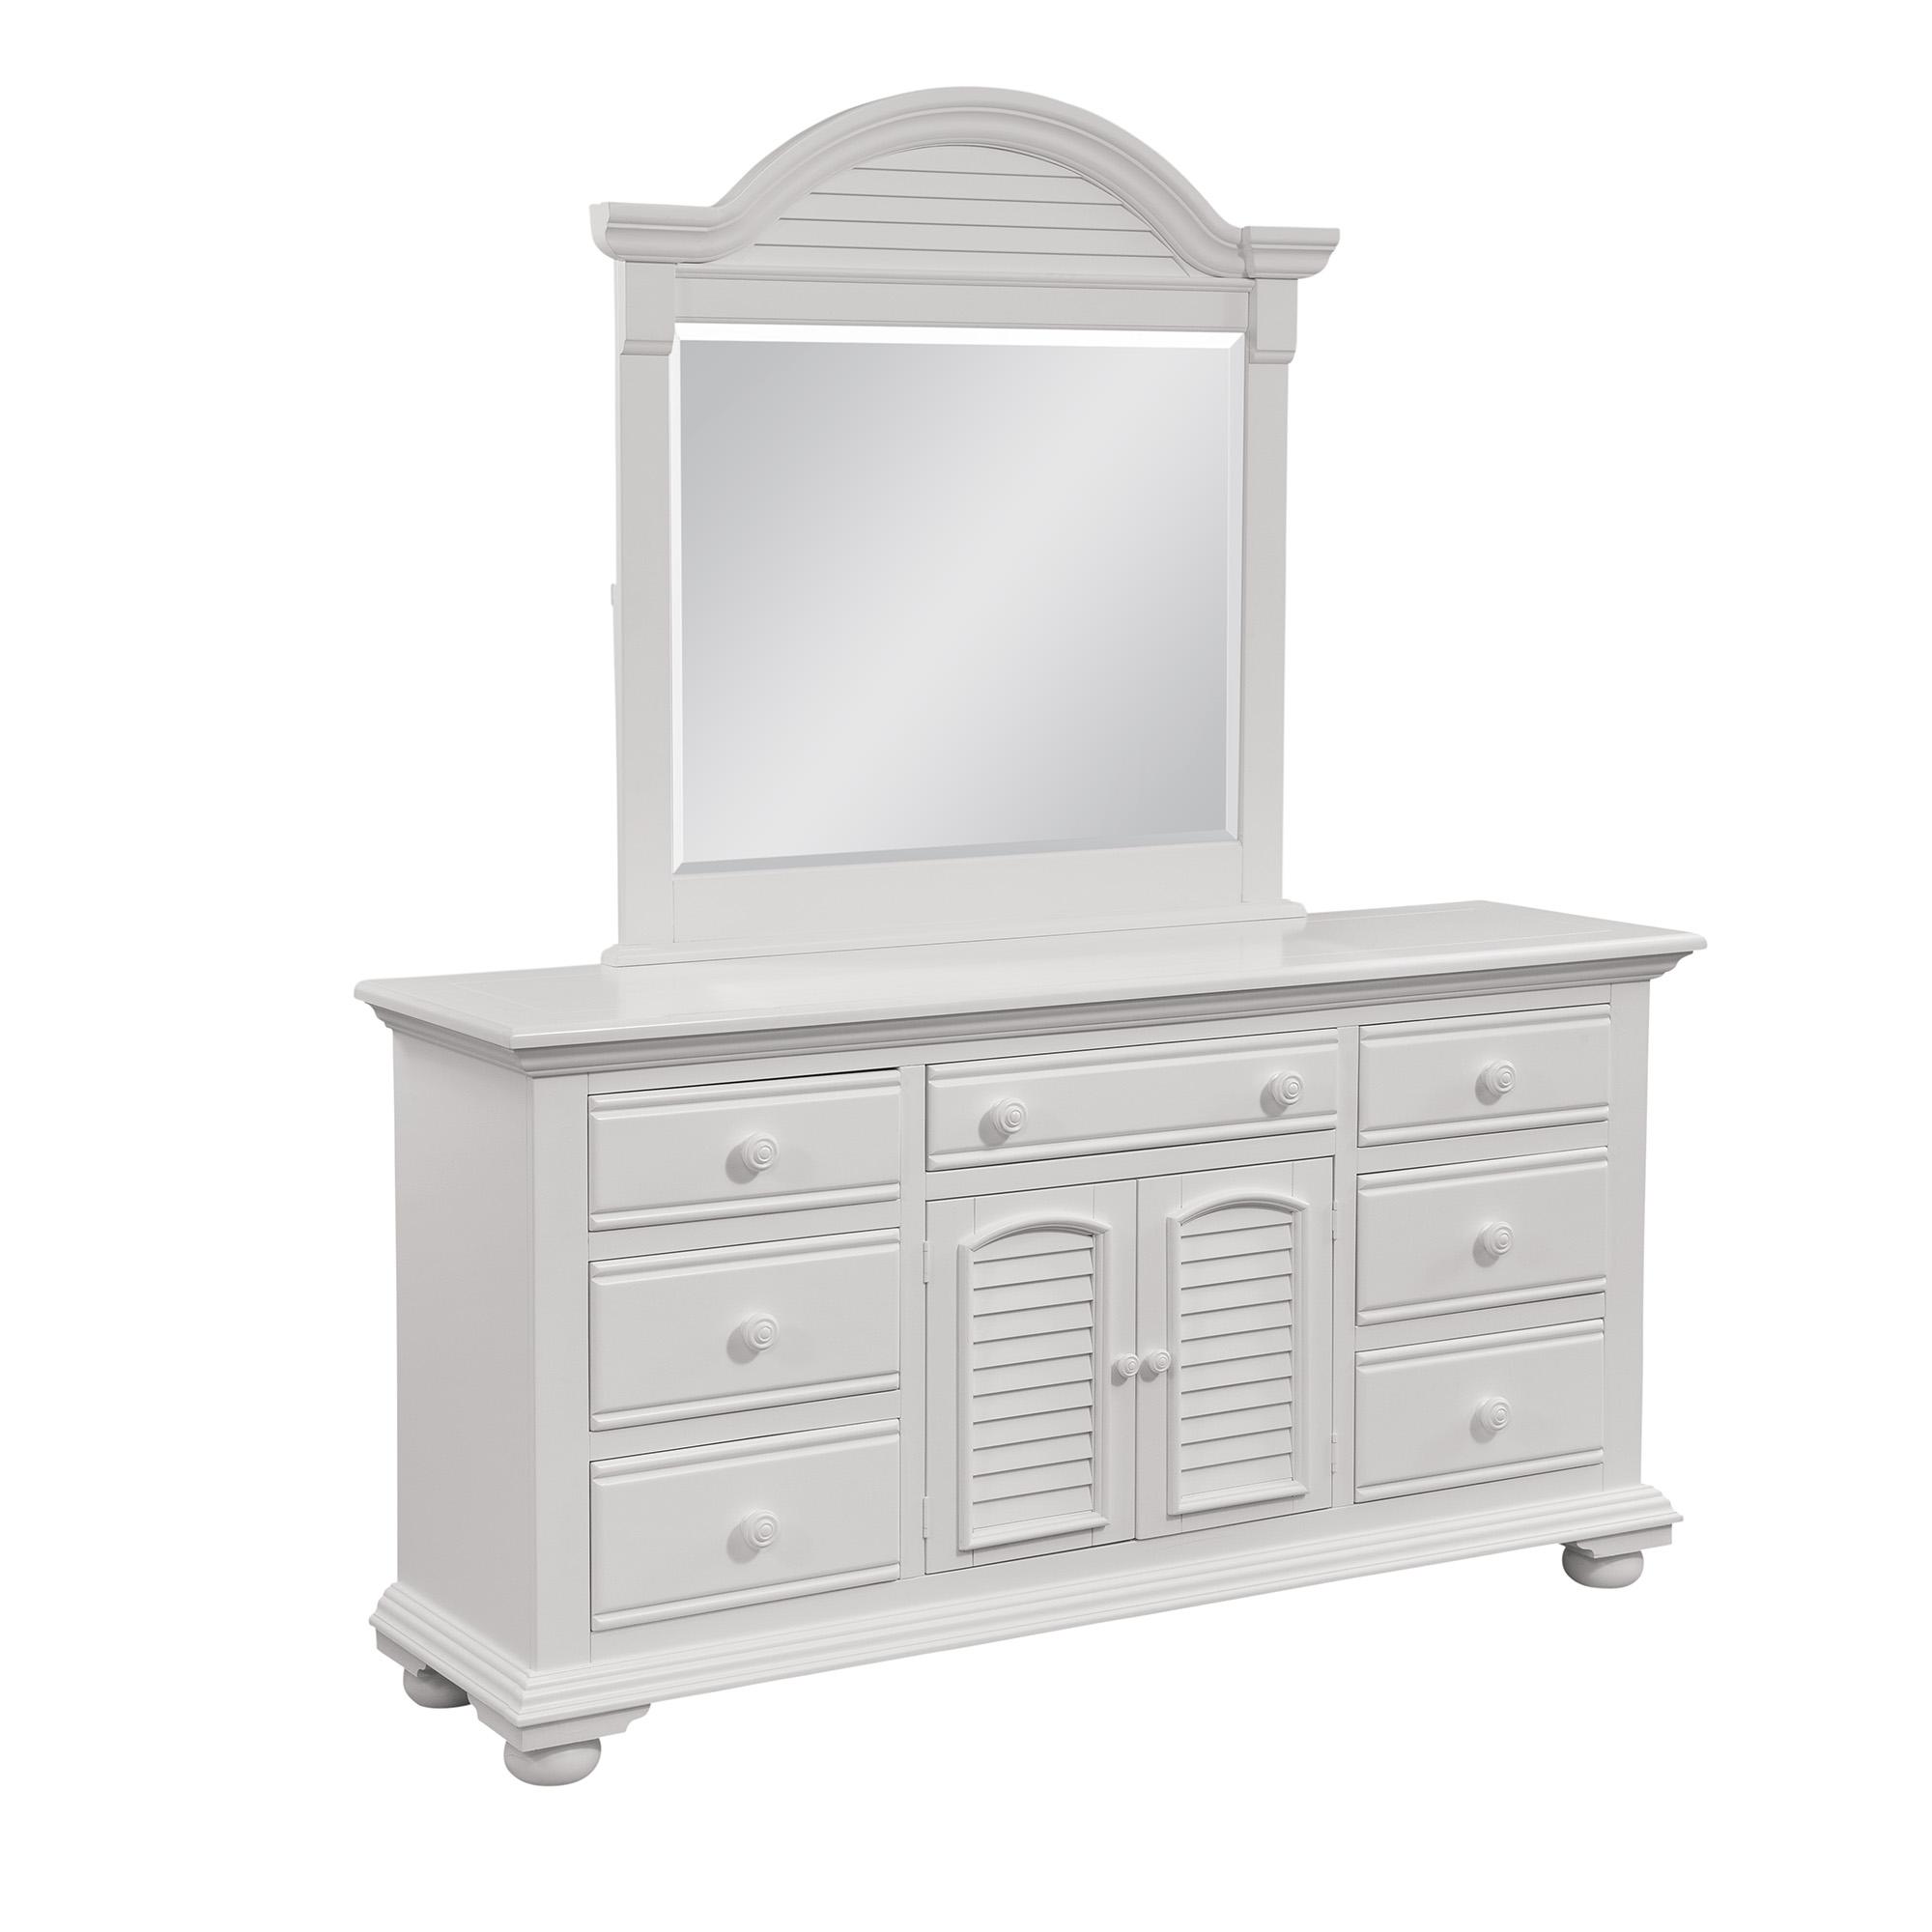 Classic, Traditional, Cottage Dresser With Mirror COTTAGE 6510-TDDM 6510-TDDM in White 